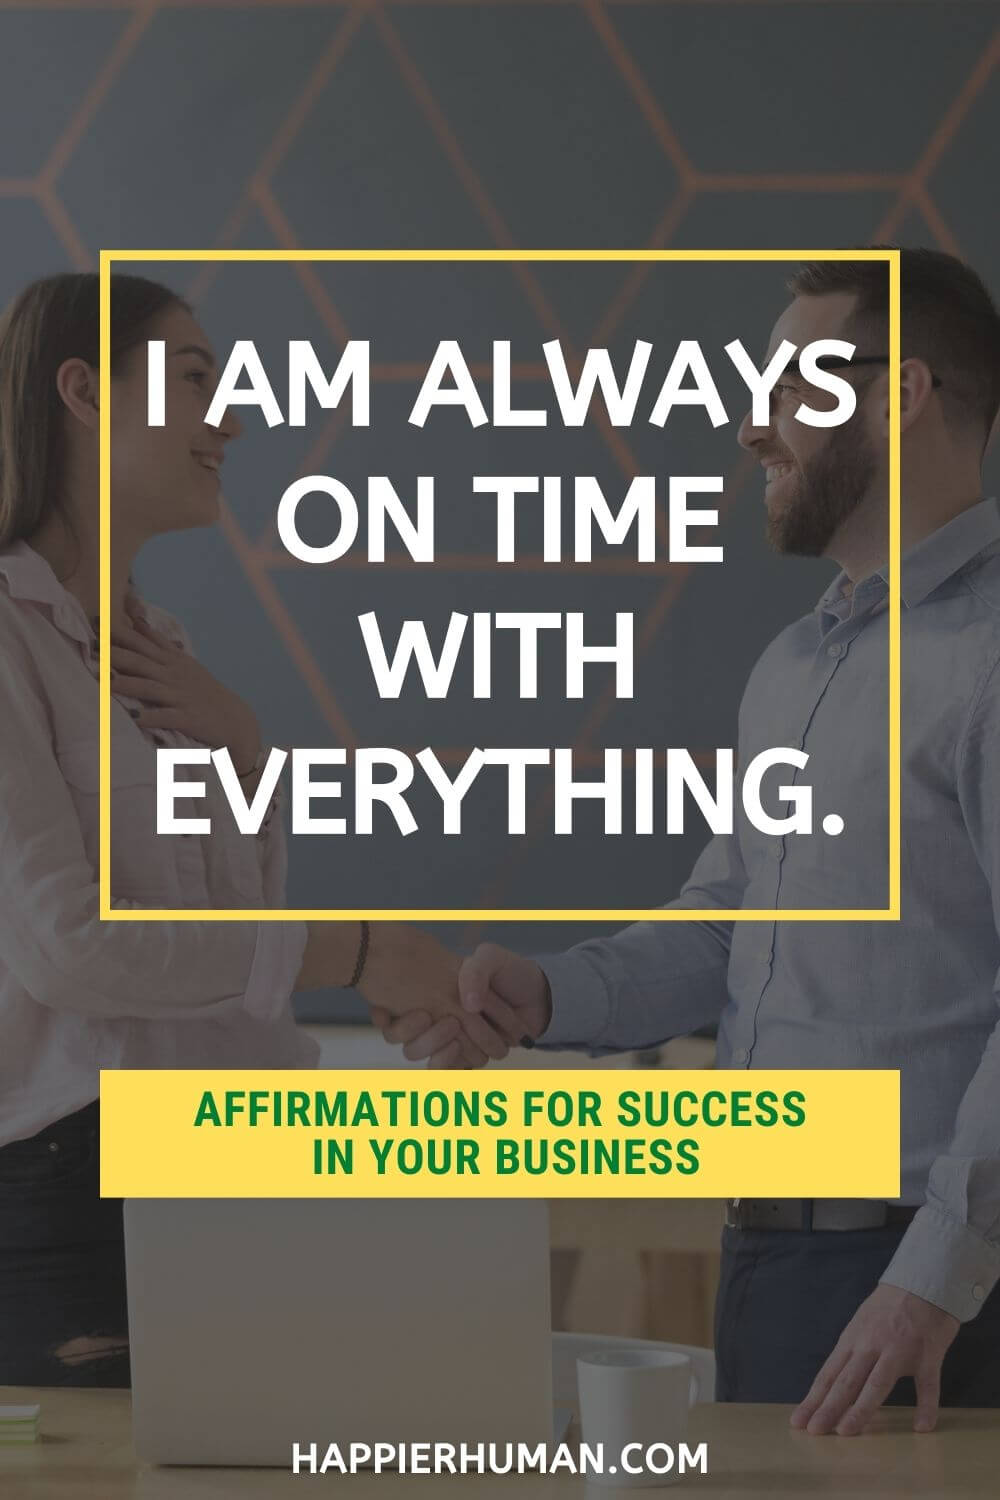 Affirmations for Success in Business - I am always on time with everything. | money and business affirmations | affirmations for work success | spiritual business affirmations